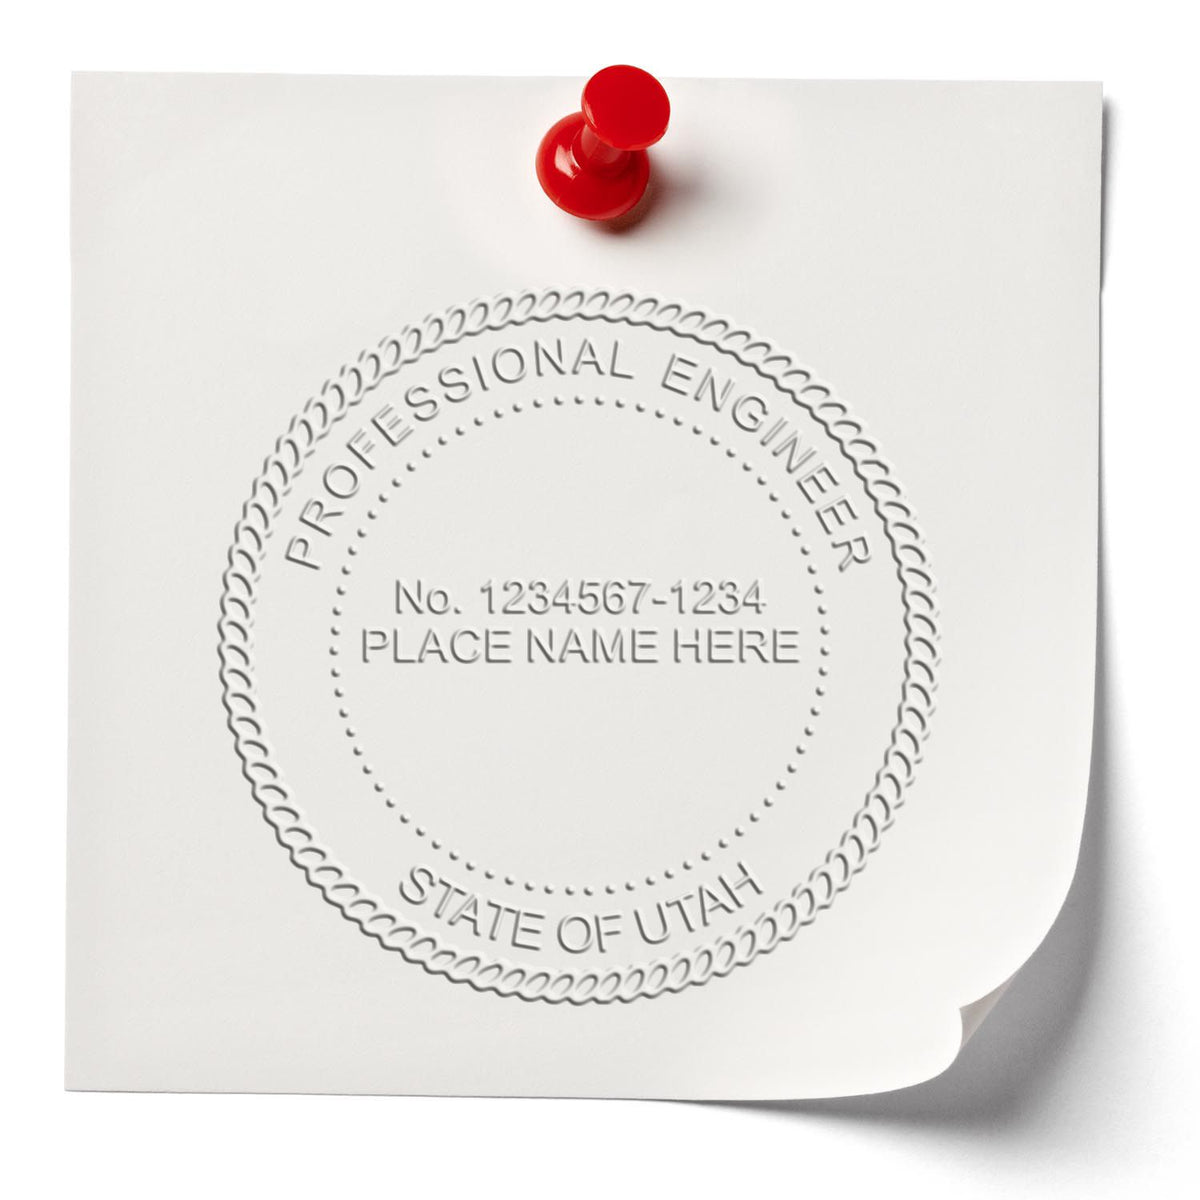 A photograph of the Hybrid Utah Engineer Seal stamp impression reveals a vivid, professional image of the on paper.